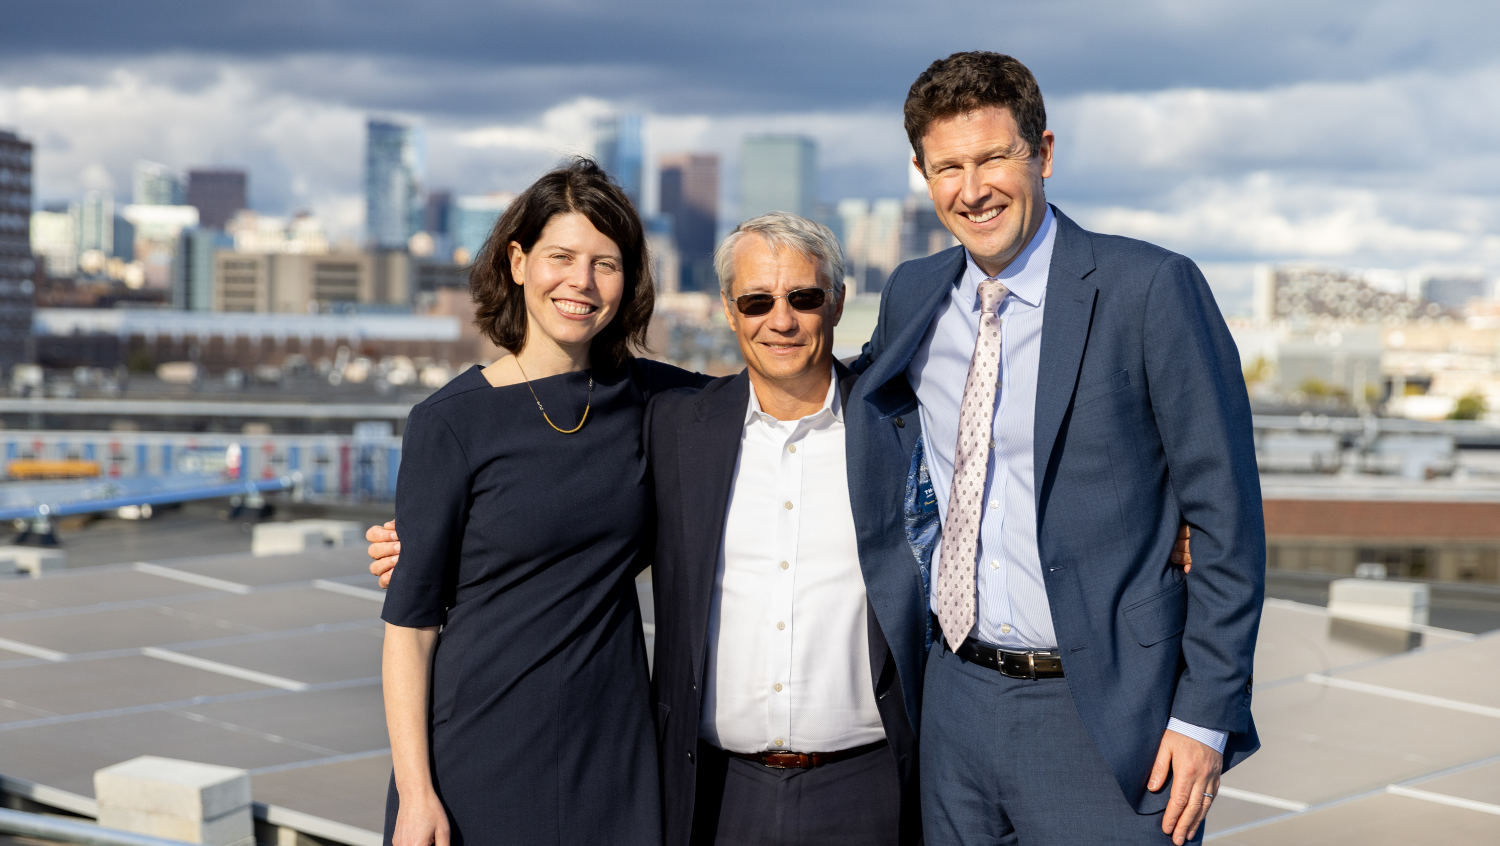 three white people: Anna Goldman, MD, MPA, MPH, Bob Biggio, Alastair Bell, MD, MBA are smiling and looking directly at the camera posing in front of a solar array with a faint view of the Boston skyline in the background. 